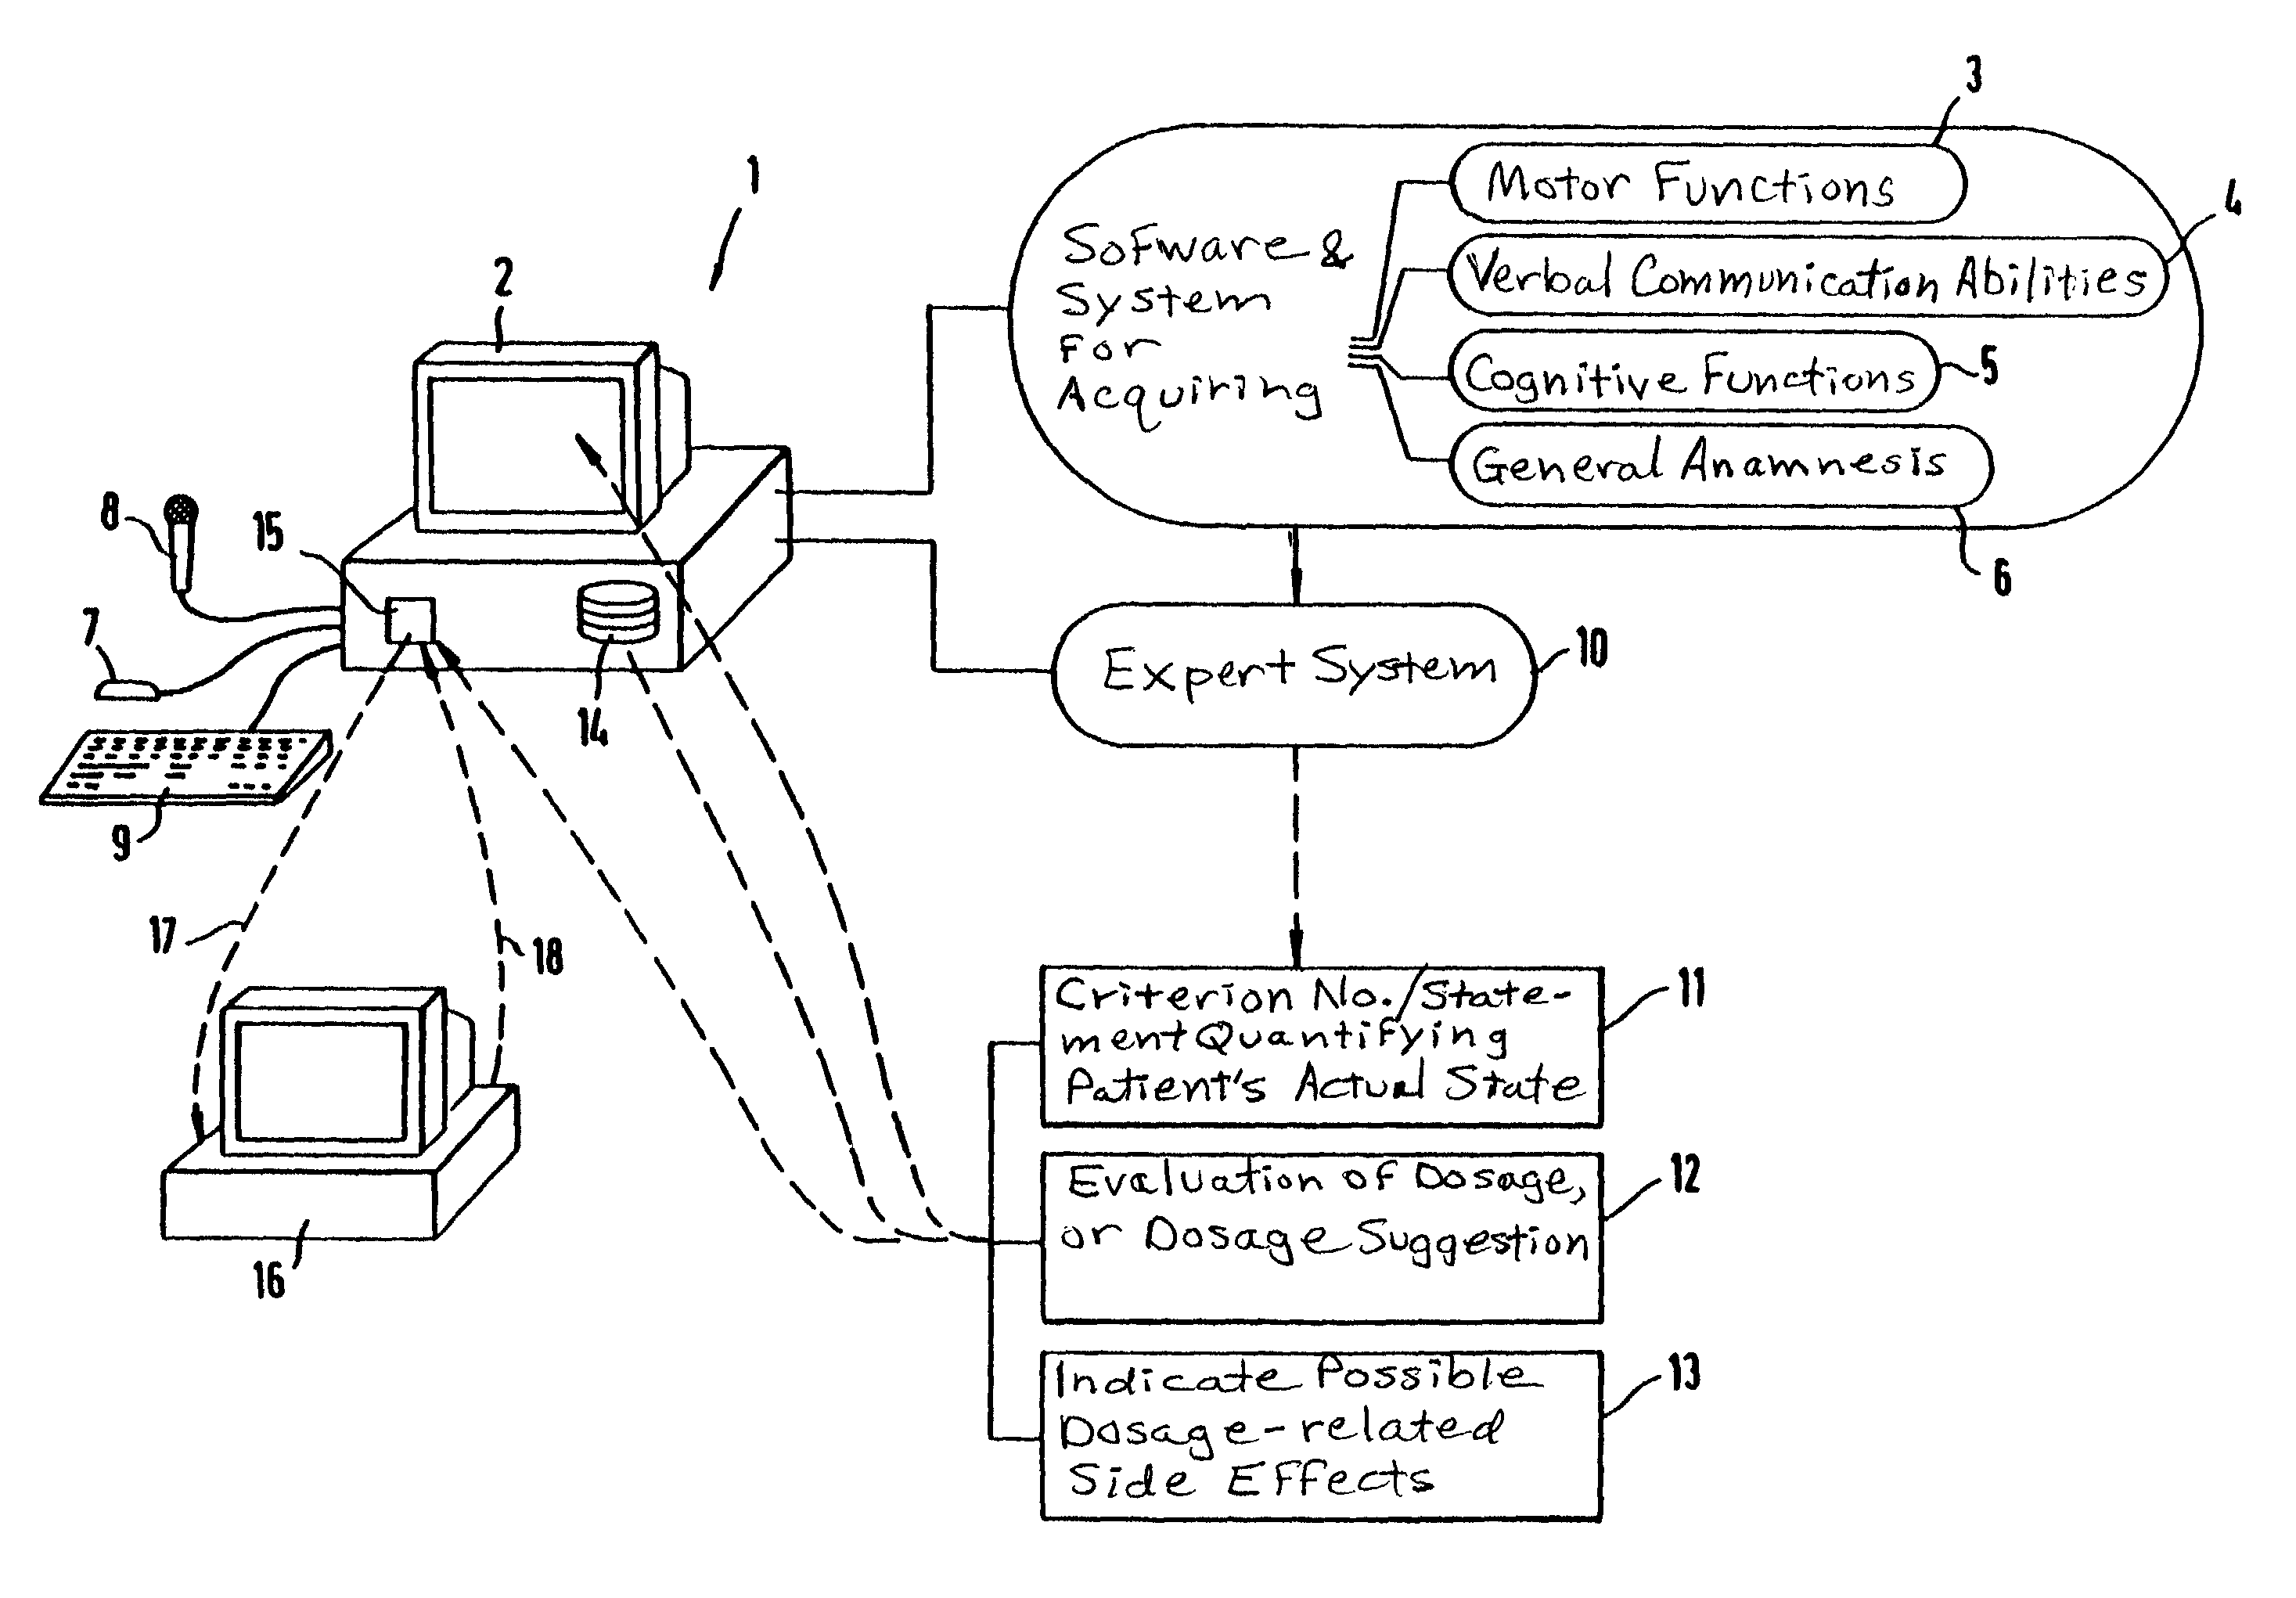 Method and system for allowing a neurologically diseased patient to self-monitor the patient's actual state